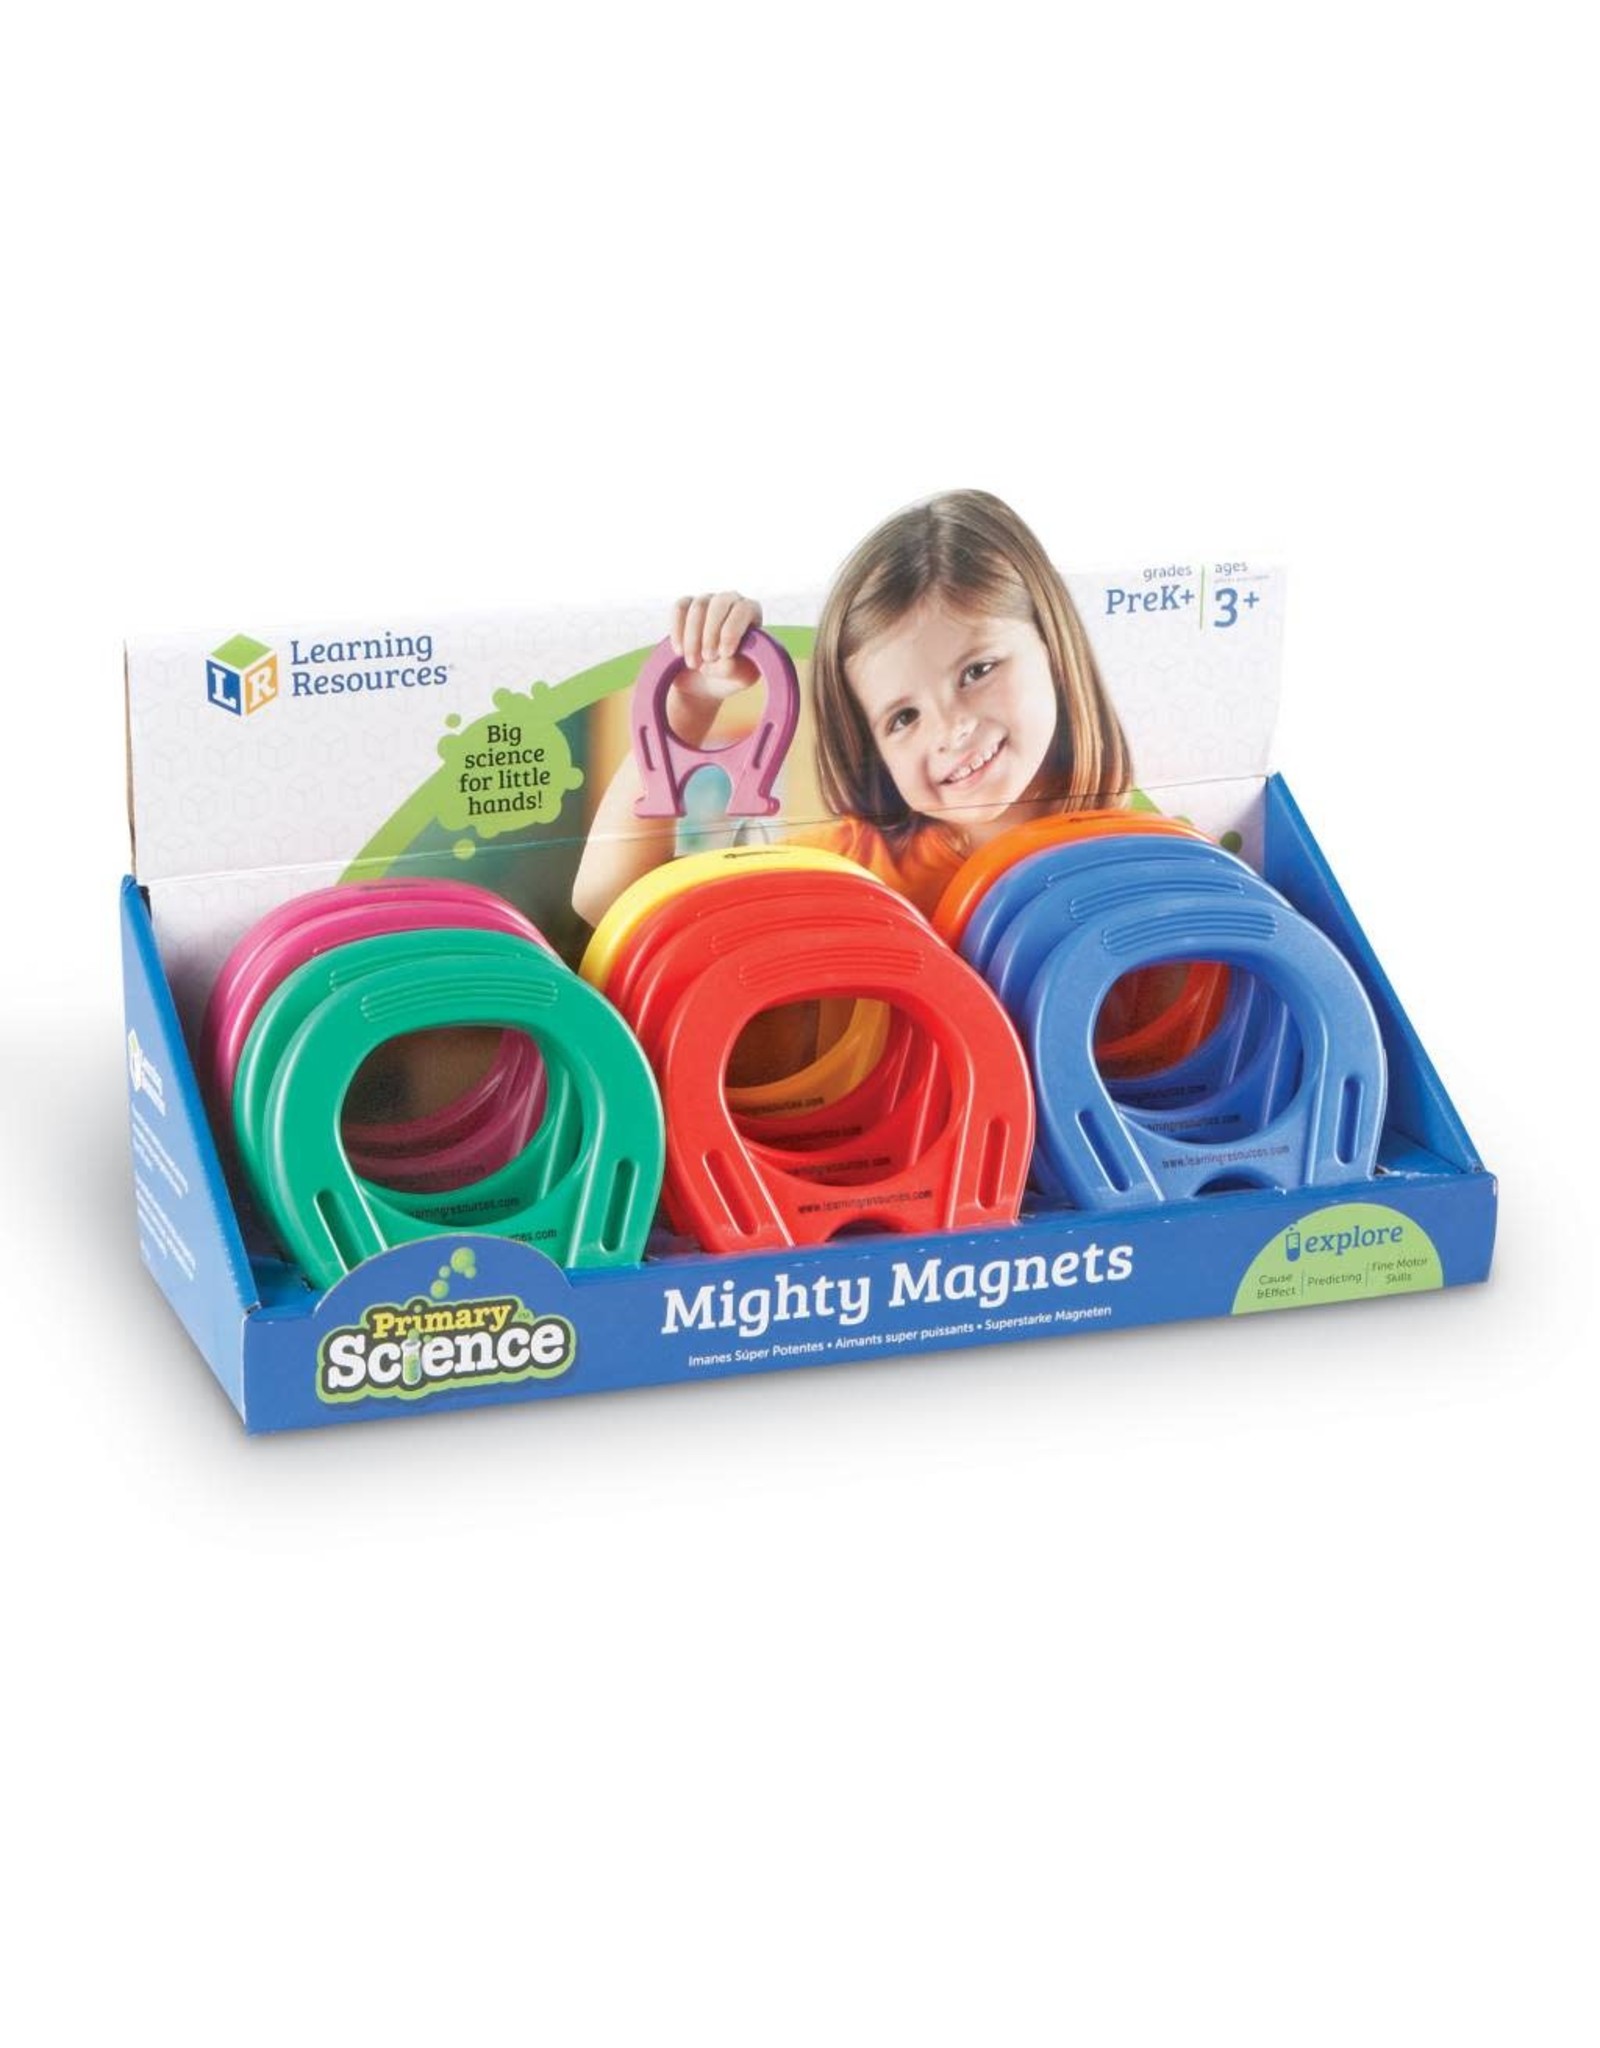 Learning Resources Primary Science Mighty Magnets Asst.